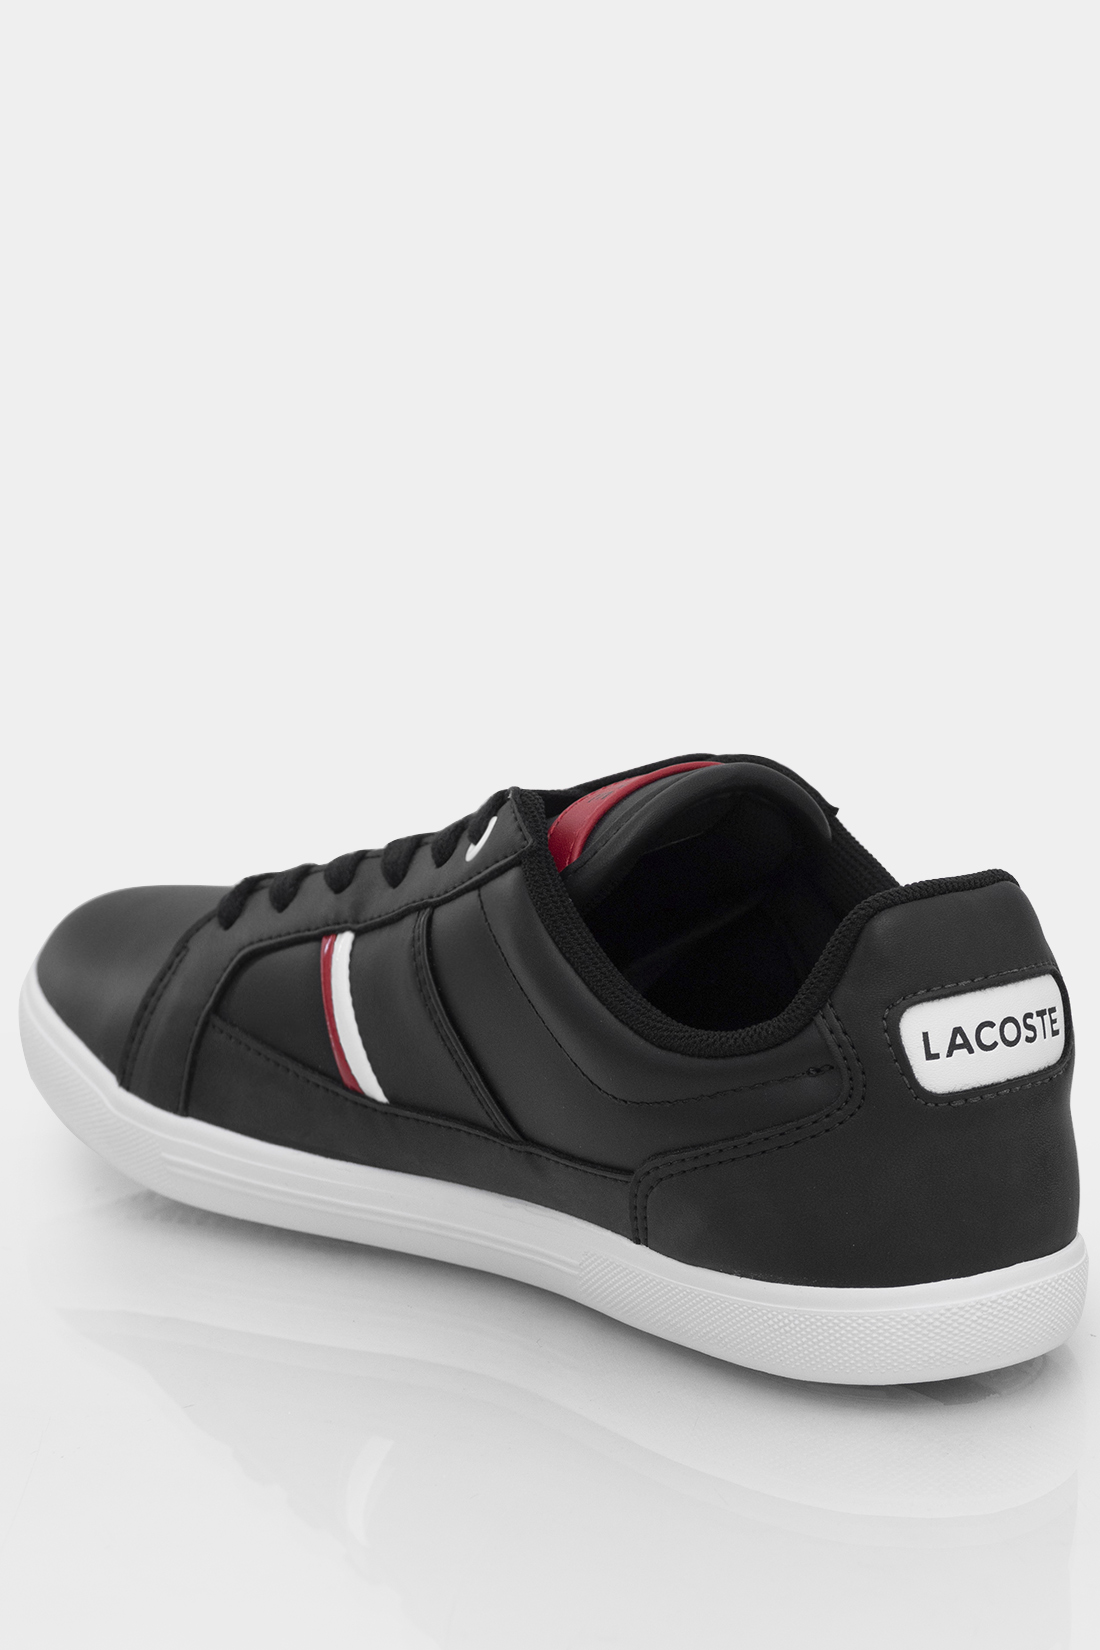 Tenis Casual Lacoste Listra